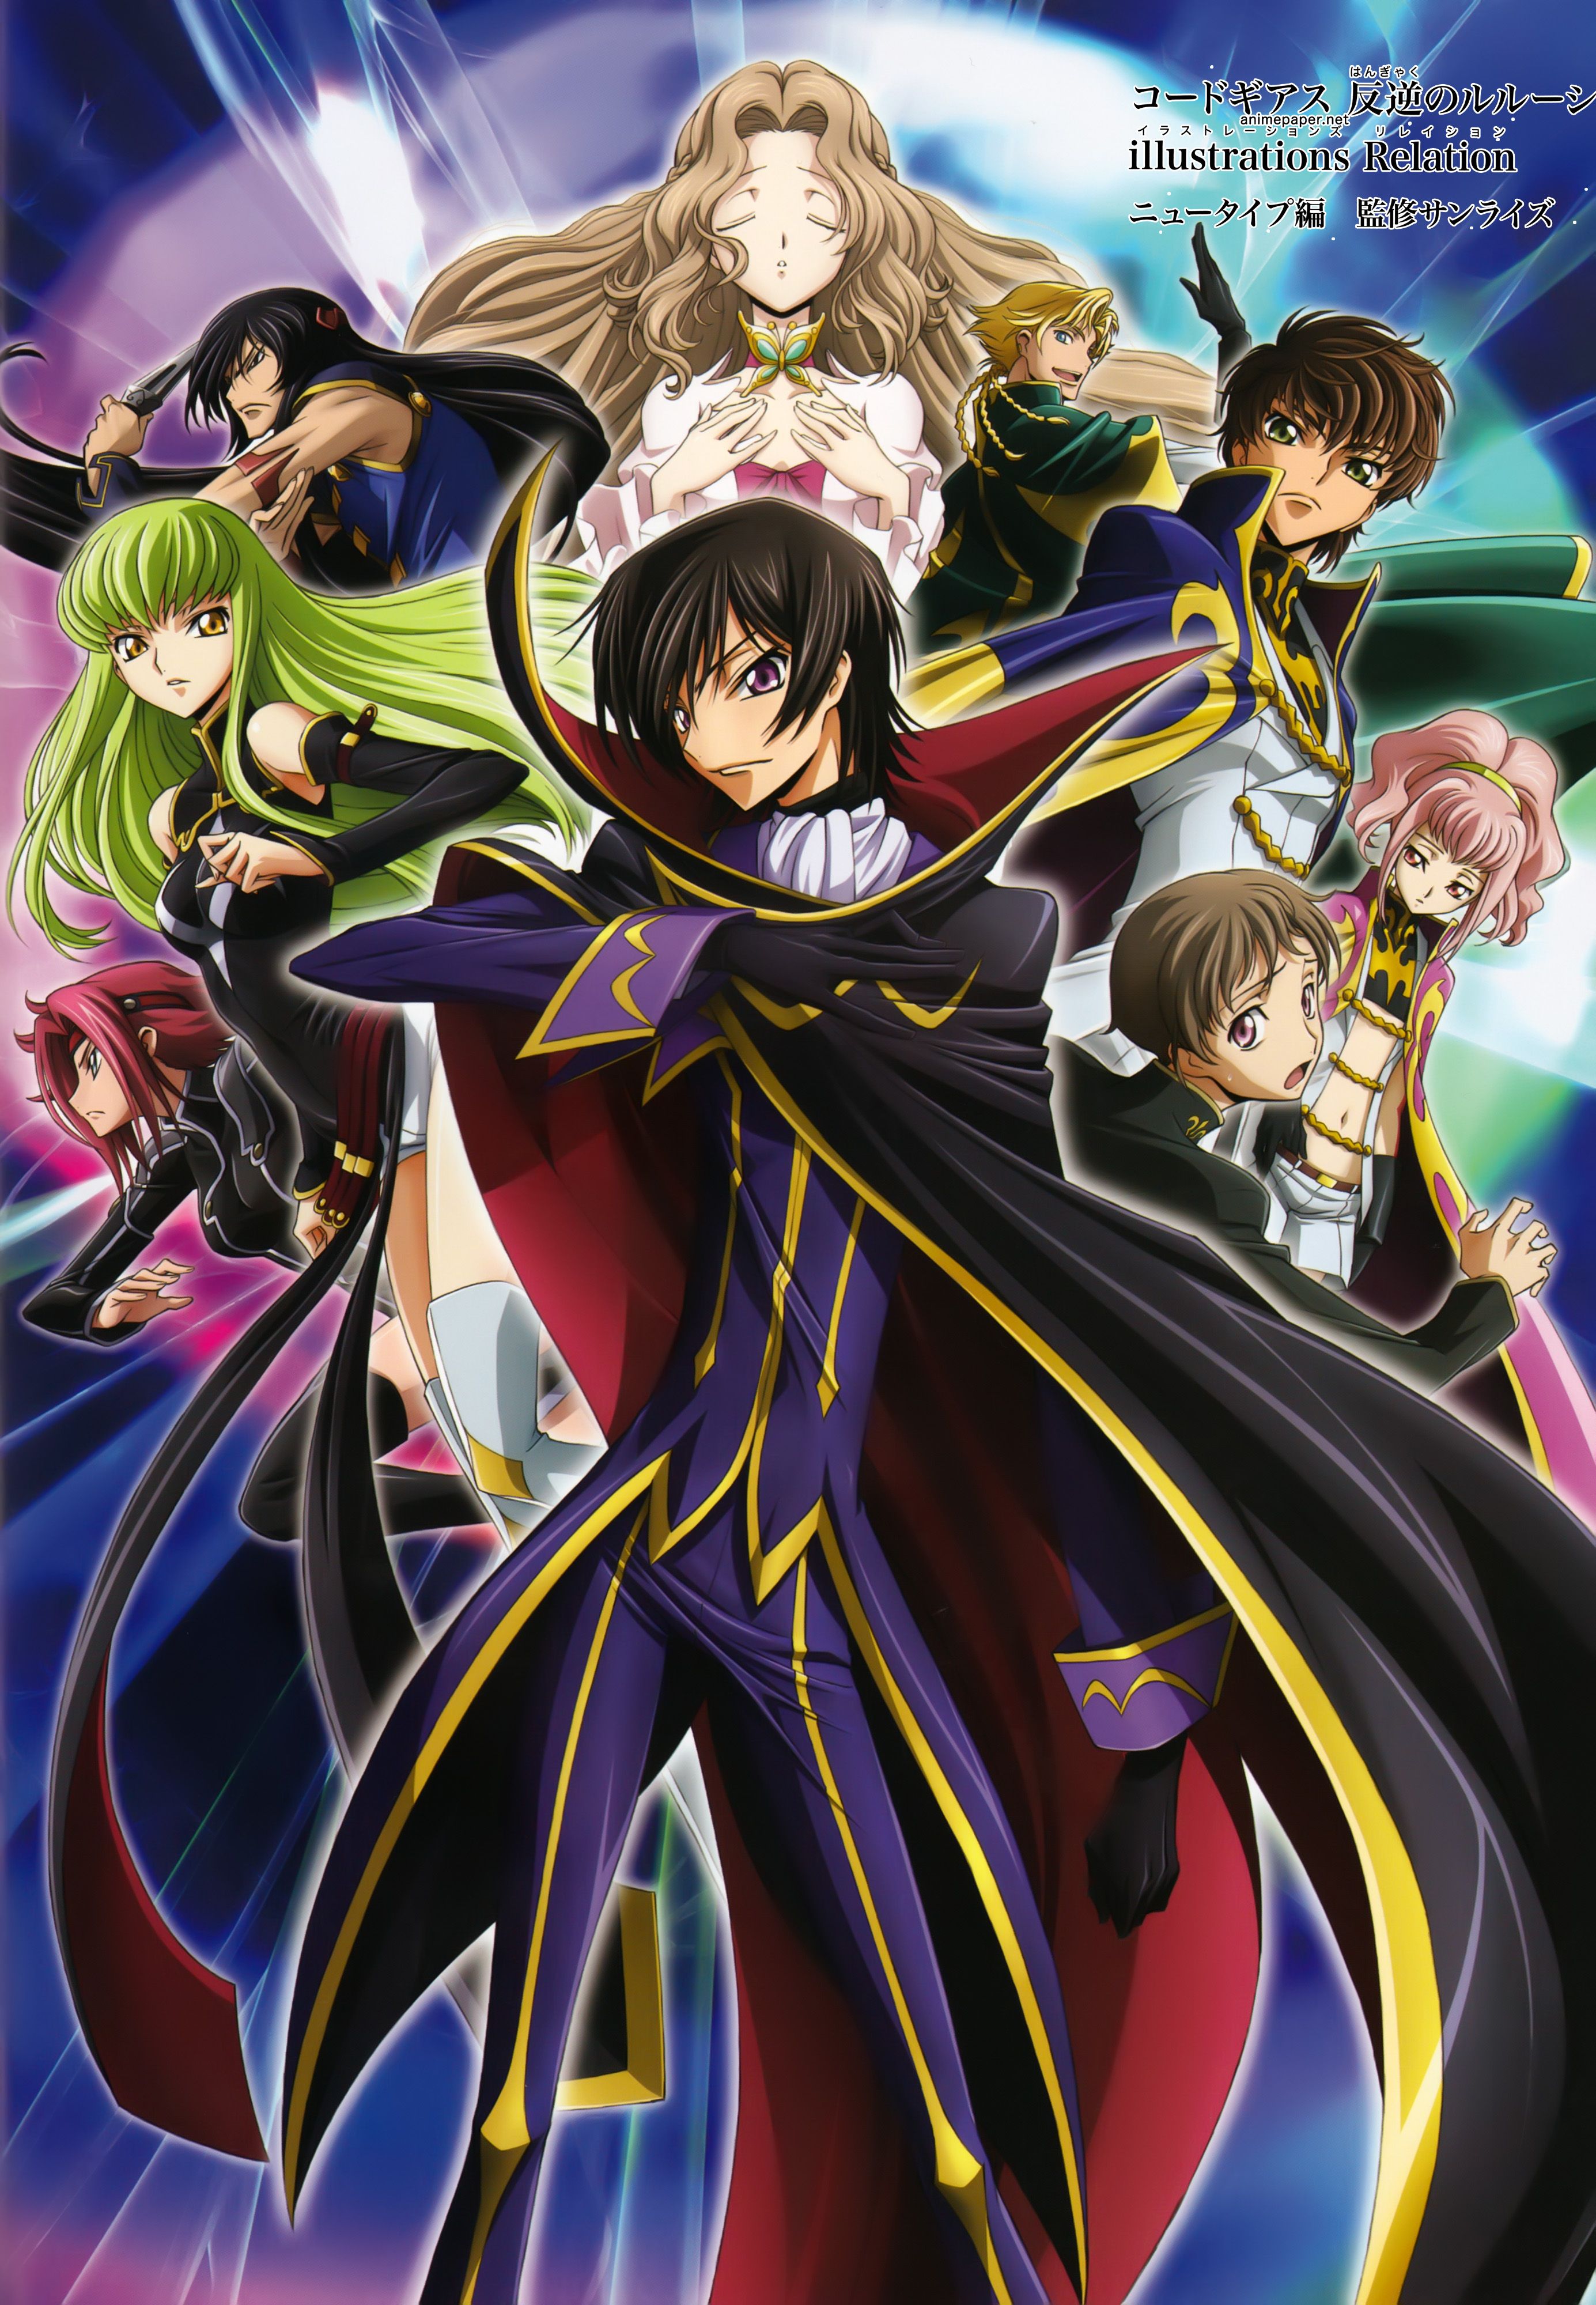 Full Hd Code Geass Android Wallpapers Wallpaper Cave